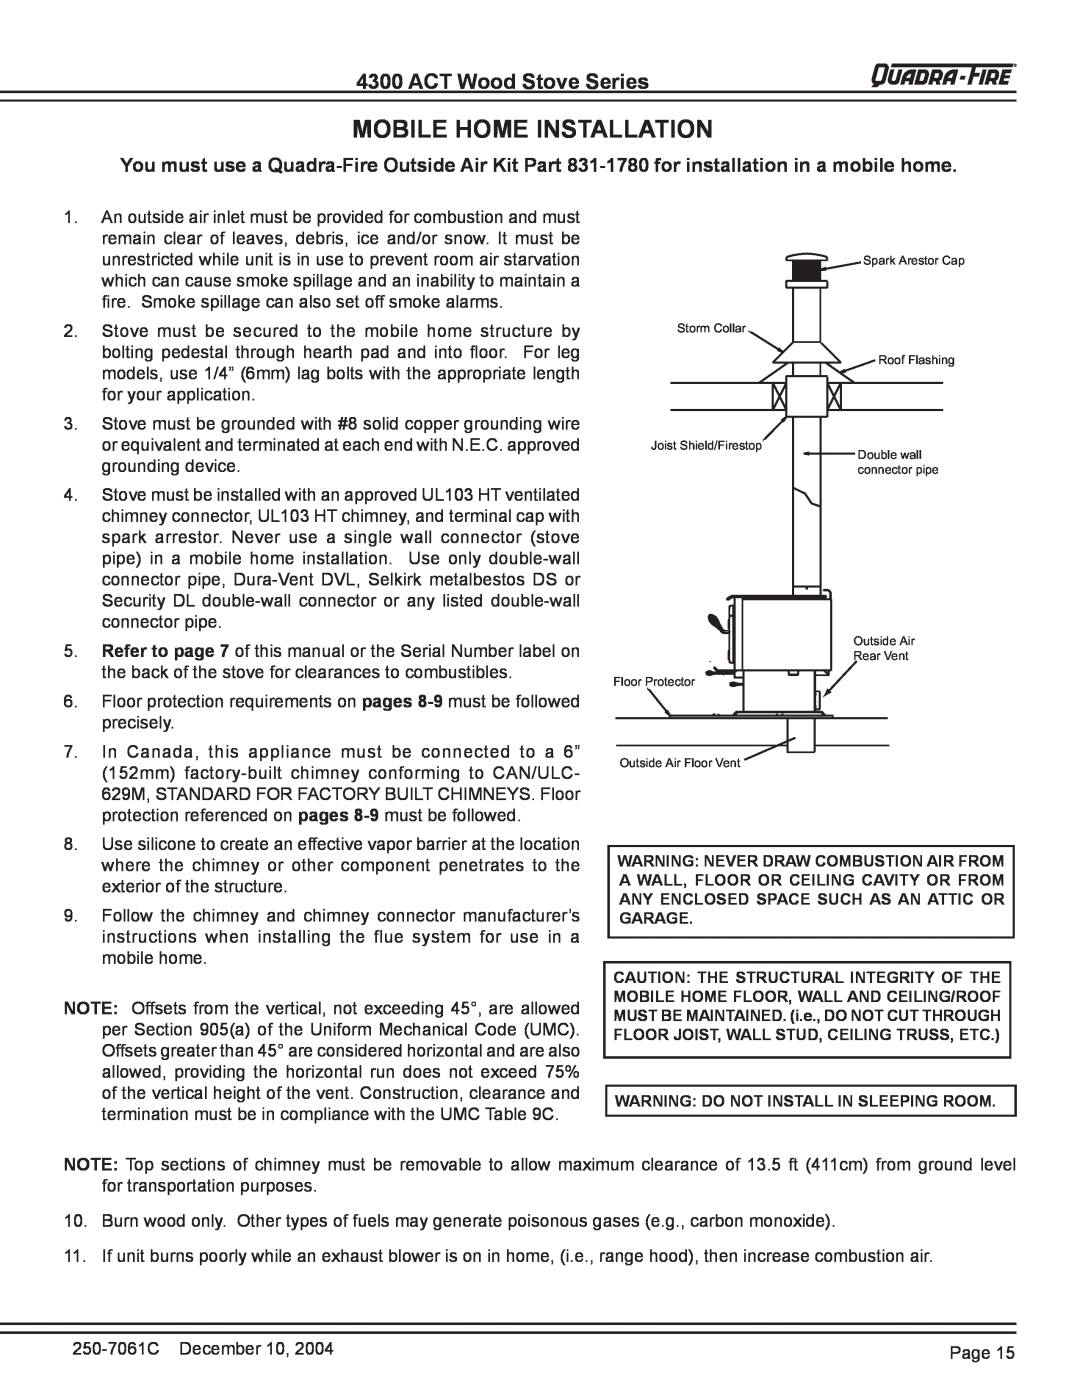 Quadra-Fire 4300 WOOD STOVE SERIES installation instructions Mobile Home Installation, ACT Wood Stove Series 